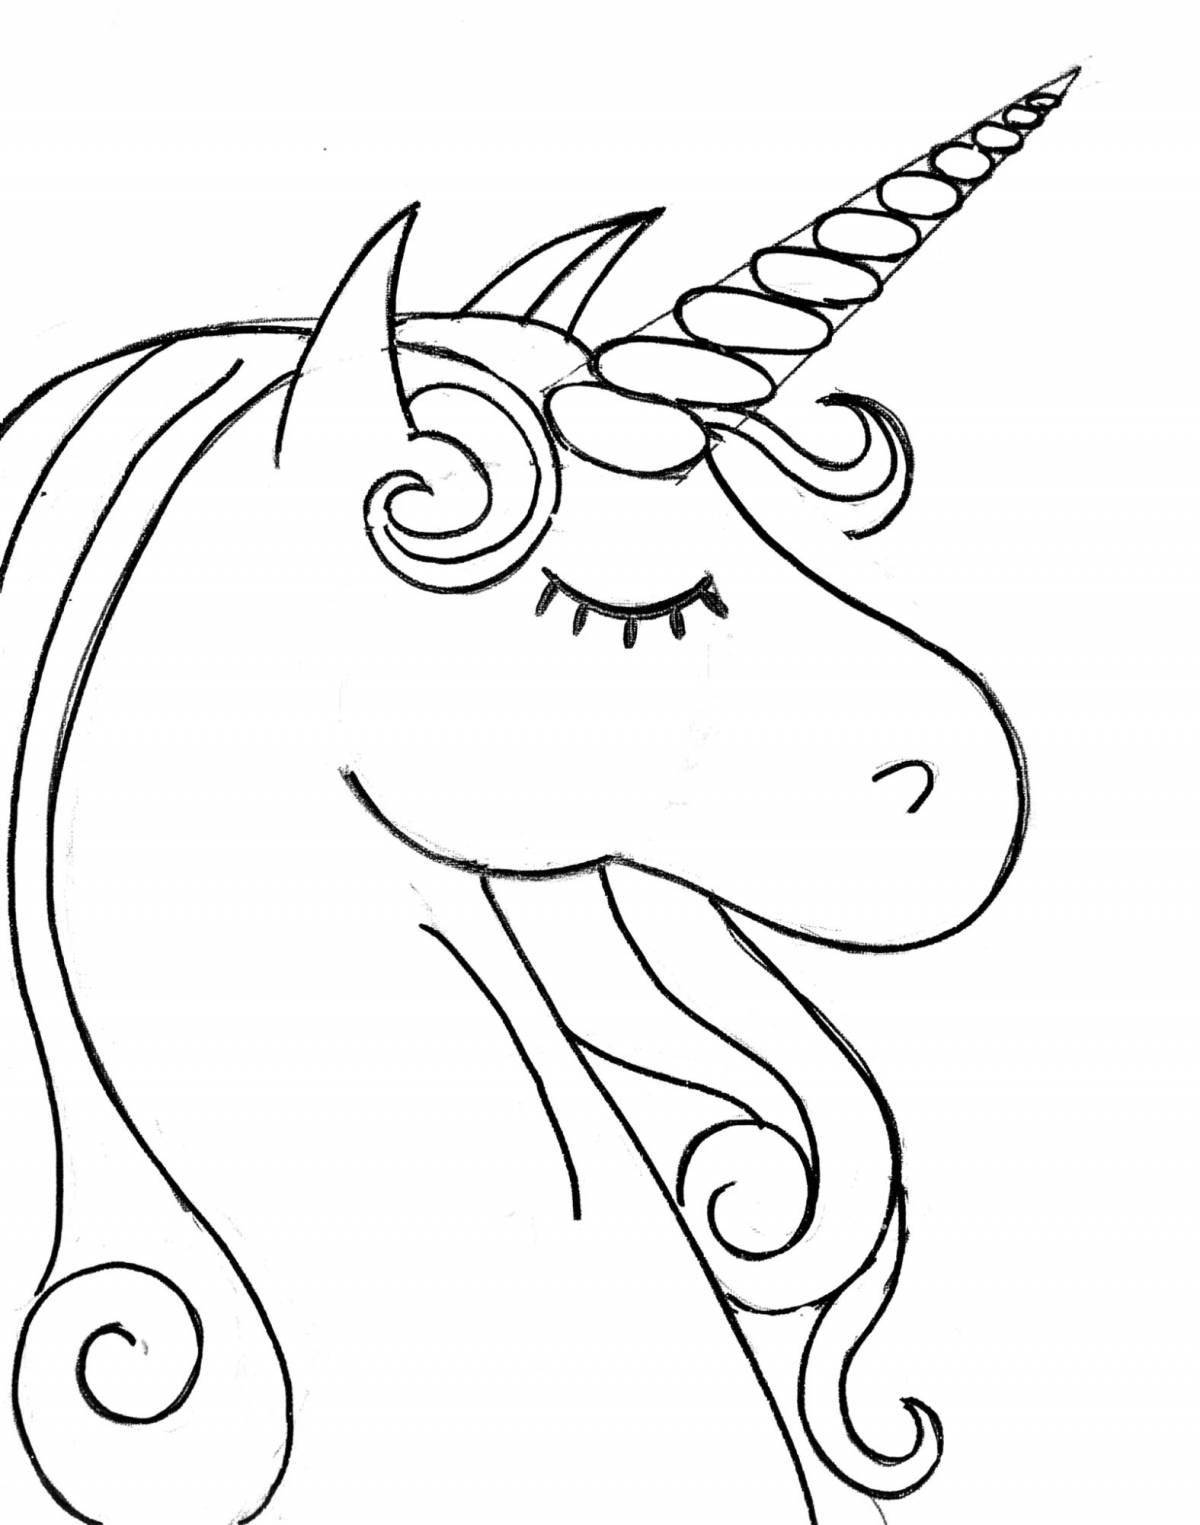 Unicorn's lungs wonderful coloring book